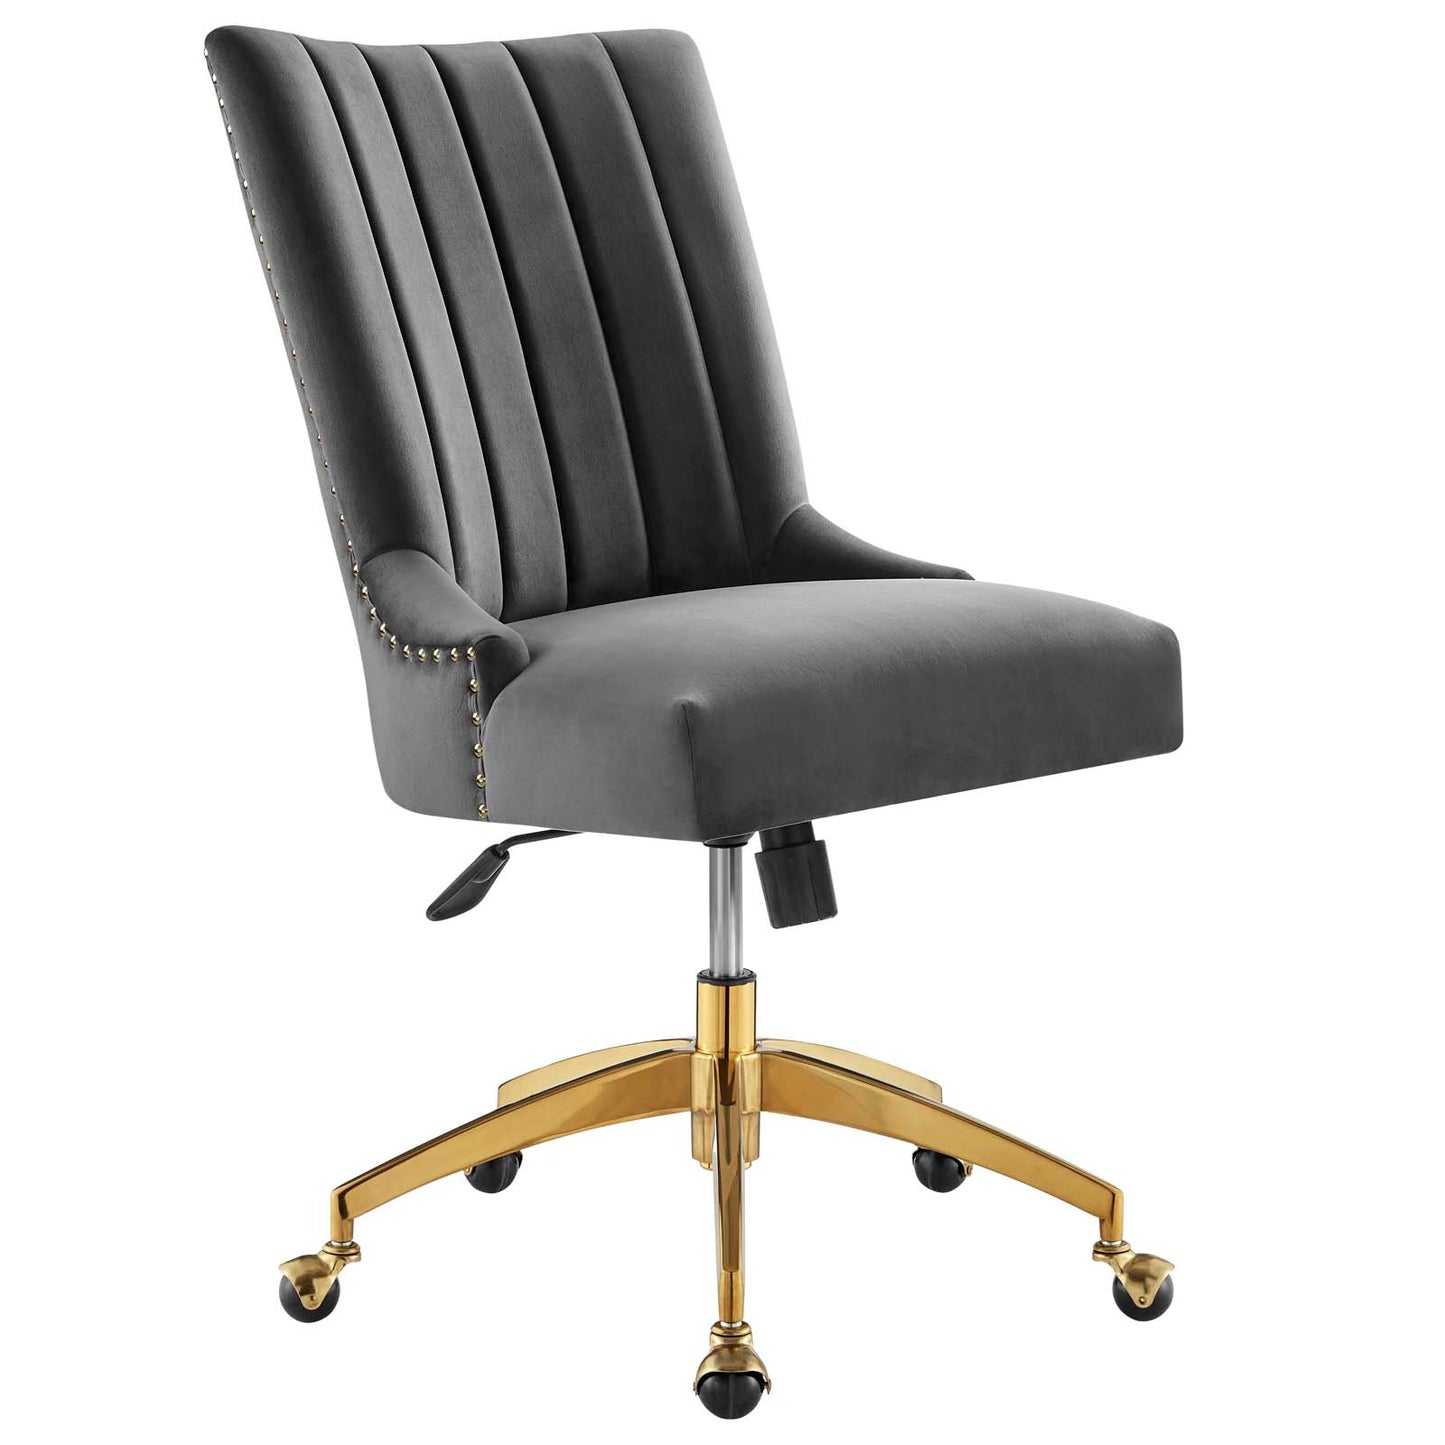 Empower Channel Tufted Performance Velvet Office Chair Gold Gray EEI-4575-GLD-GRY